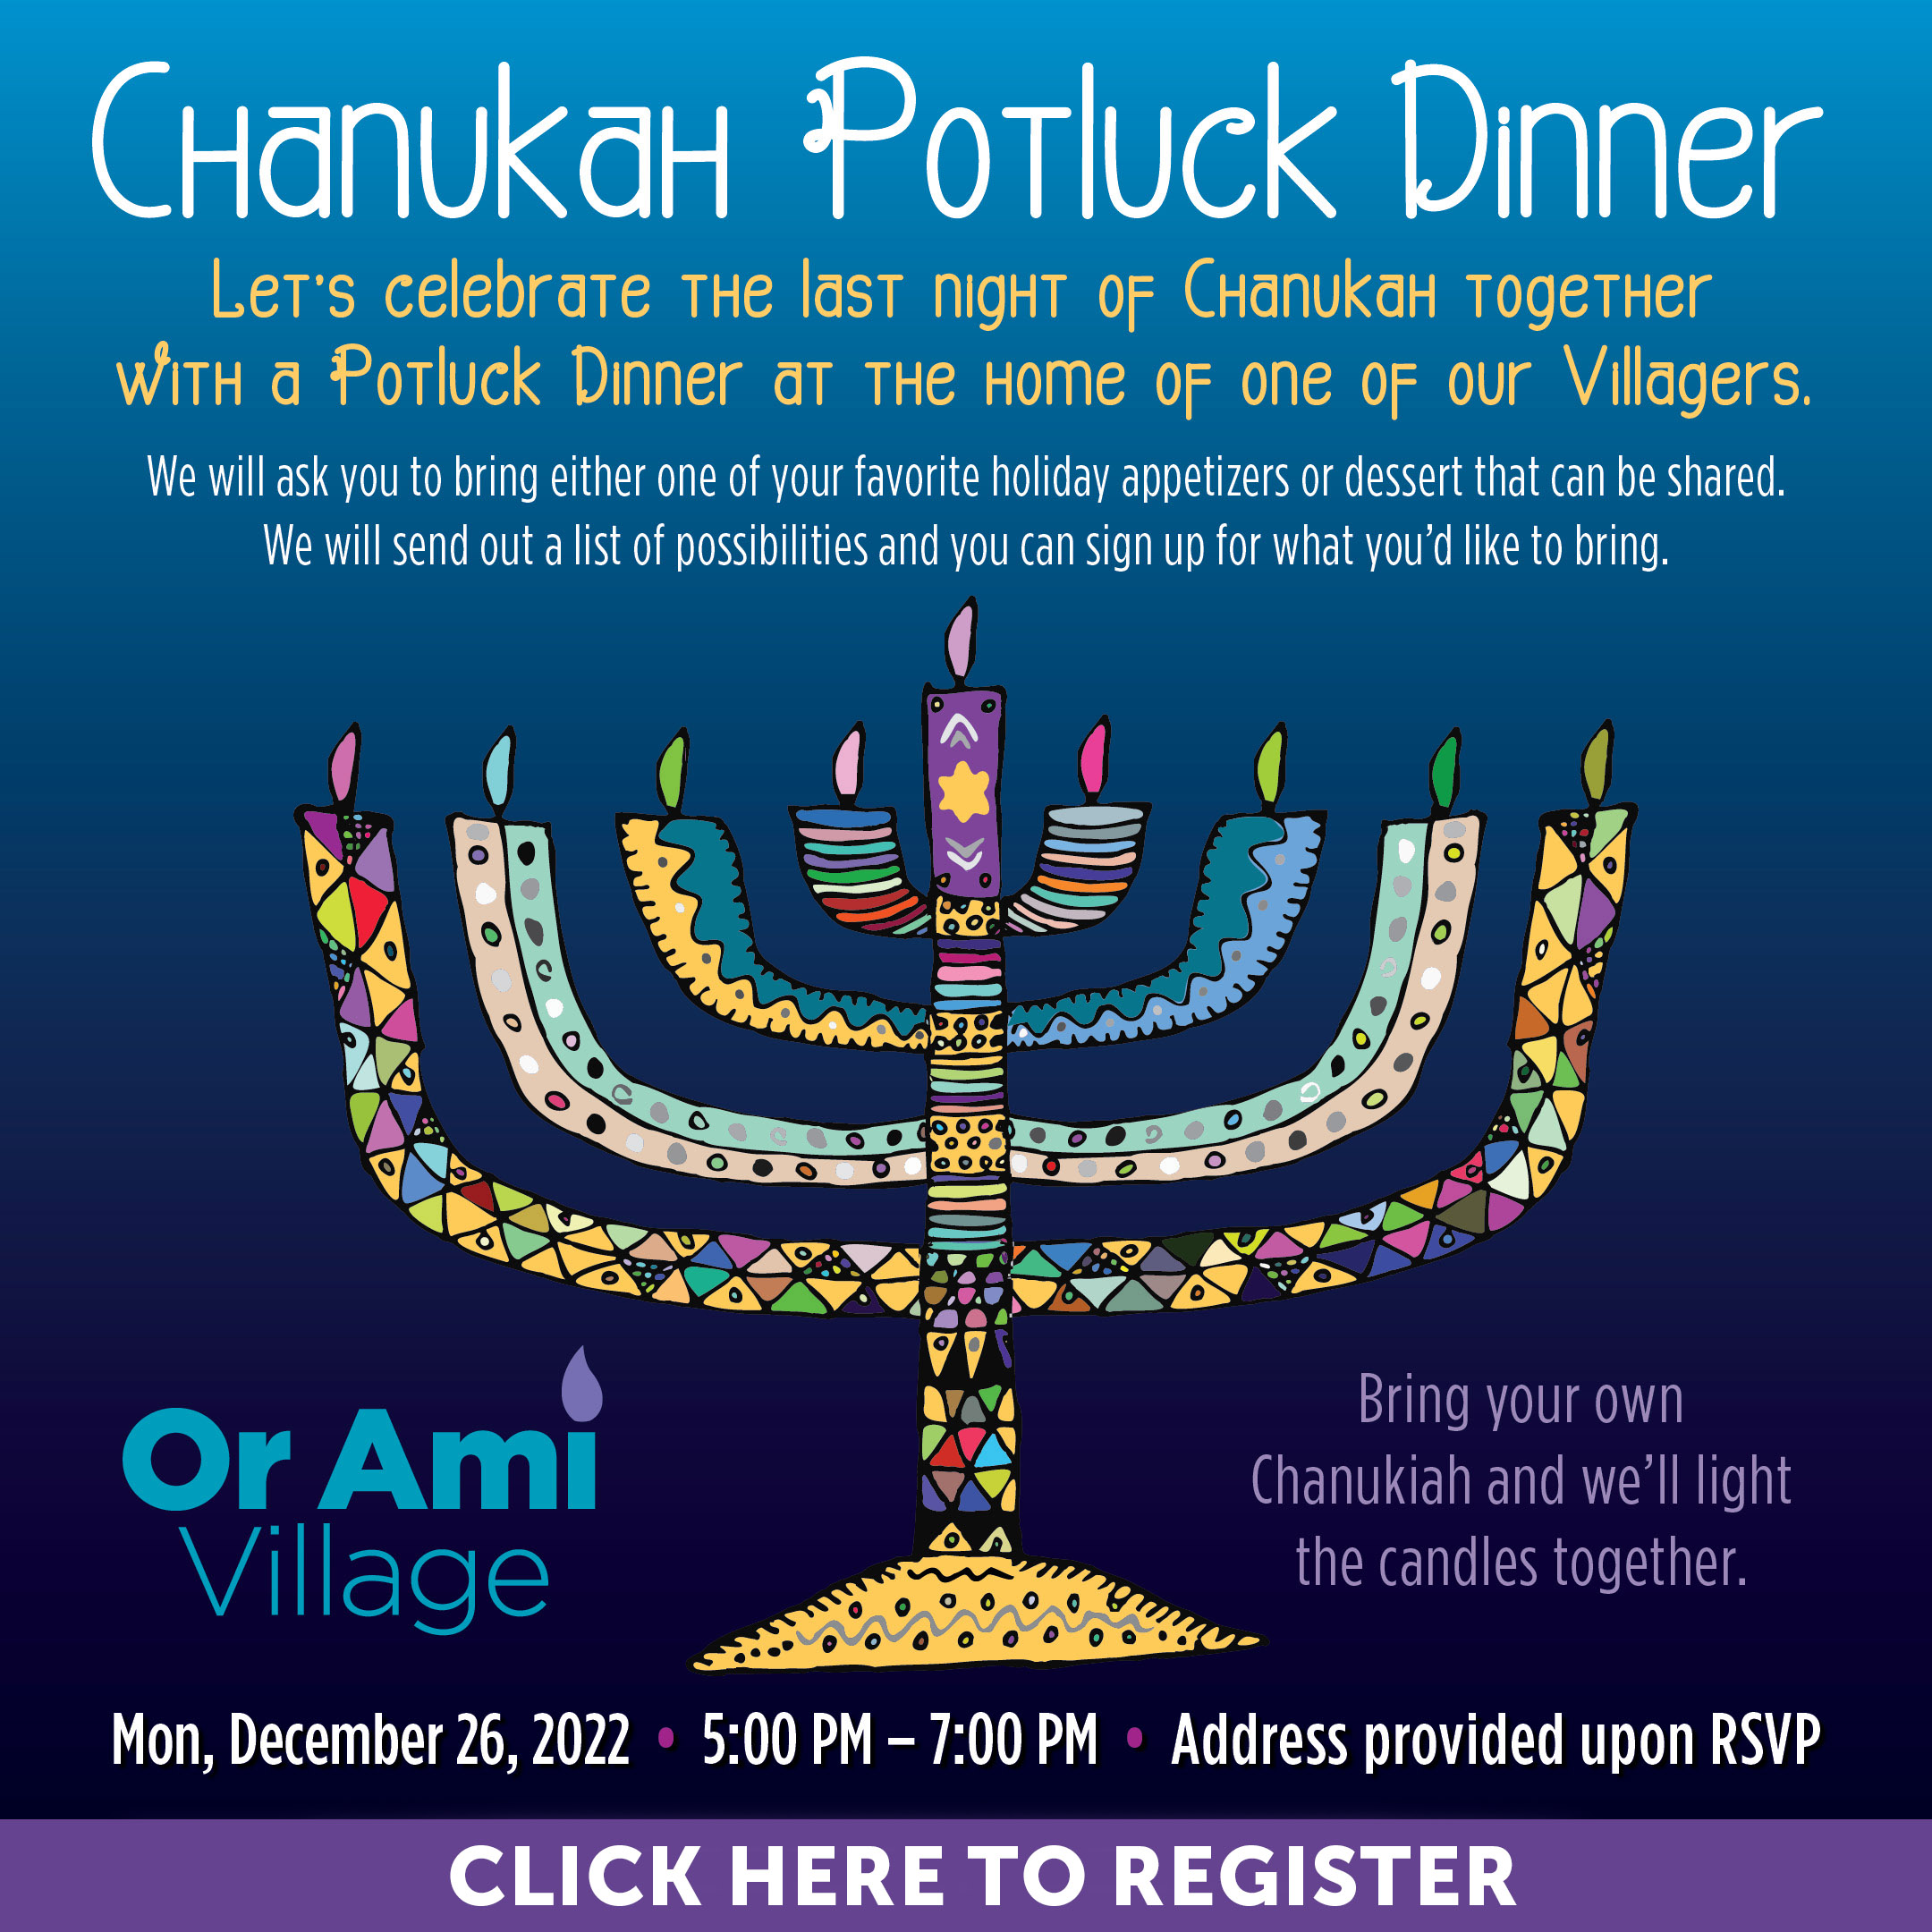 Or Ami Village Chanukah Potluck Dinner Graphic with CLICK